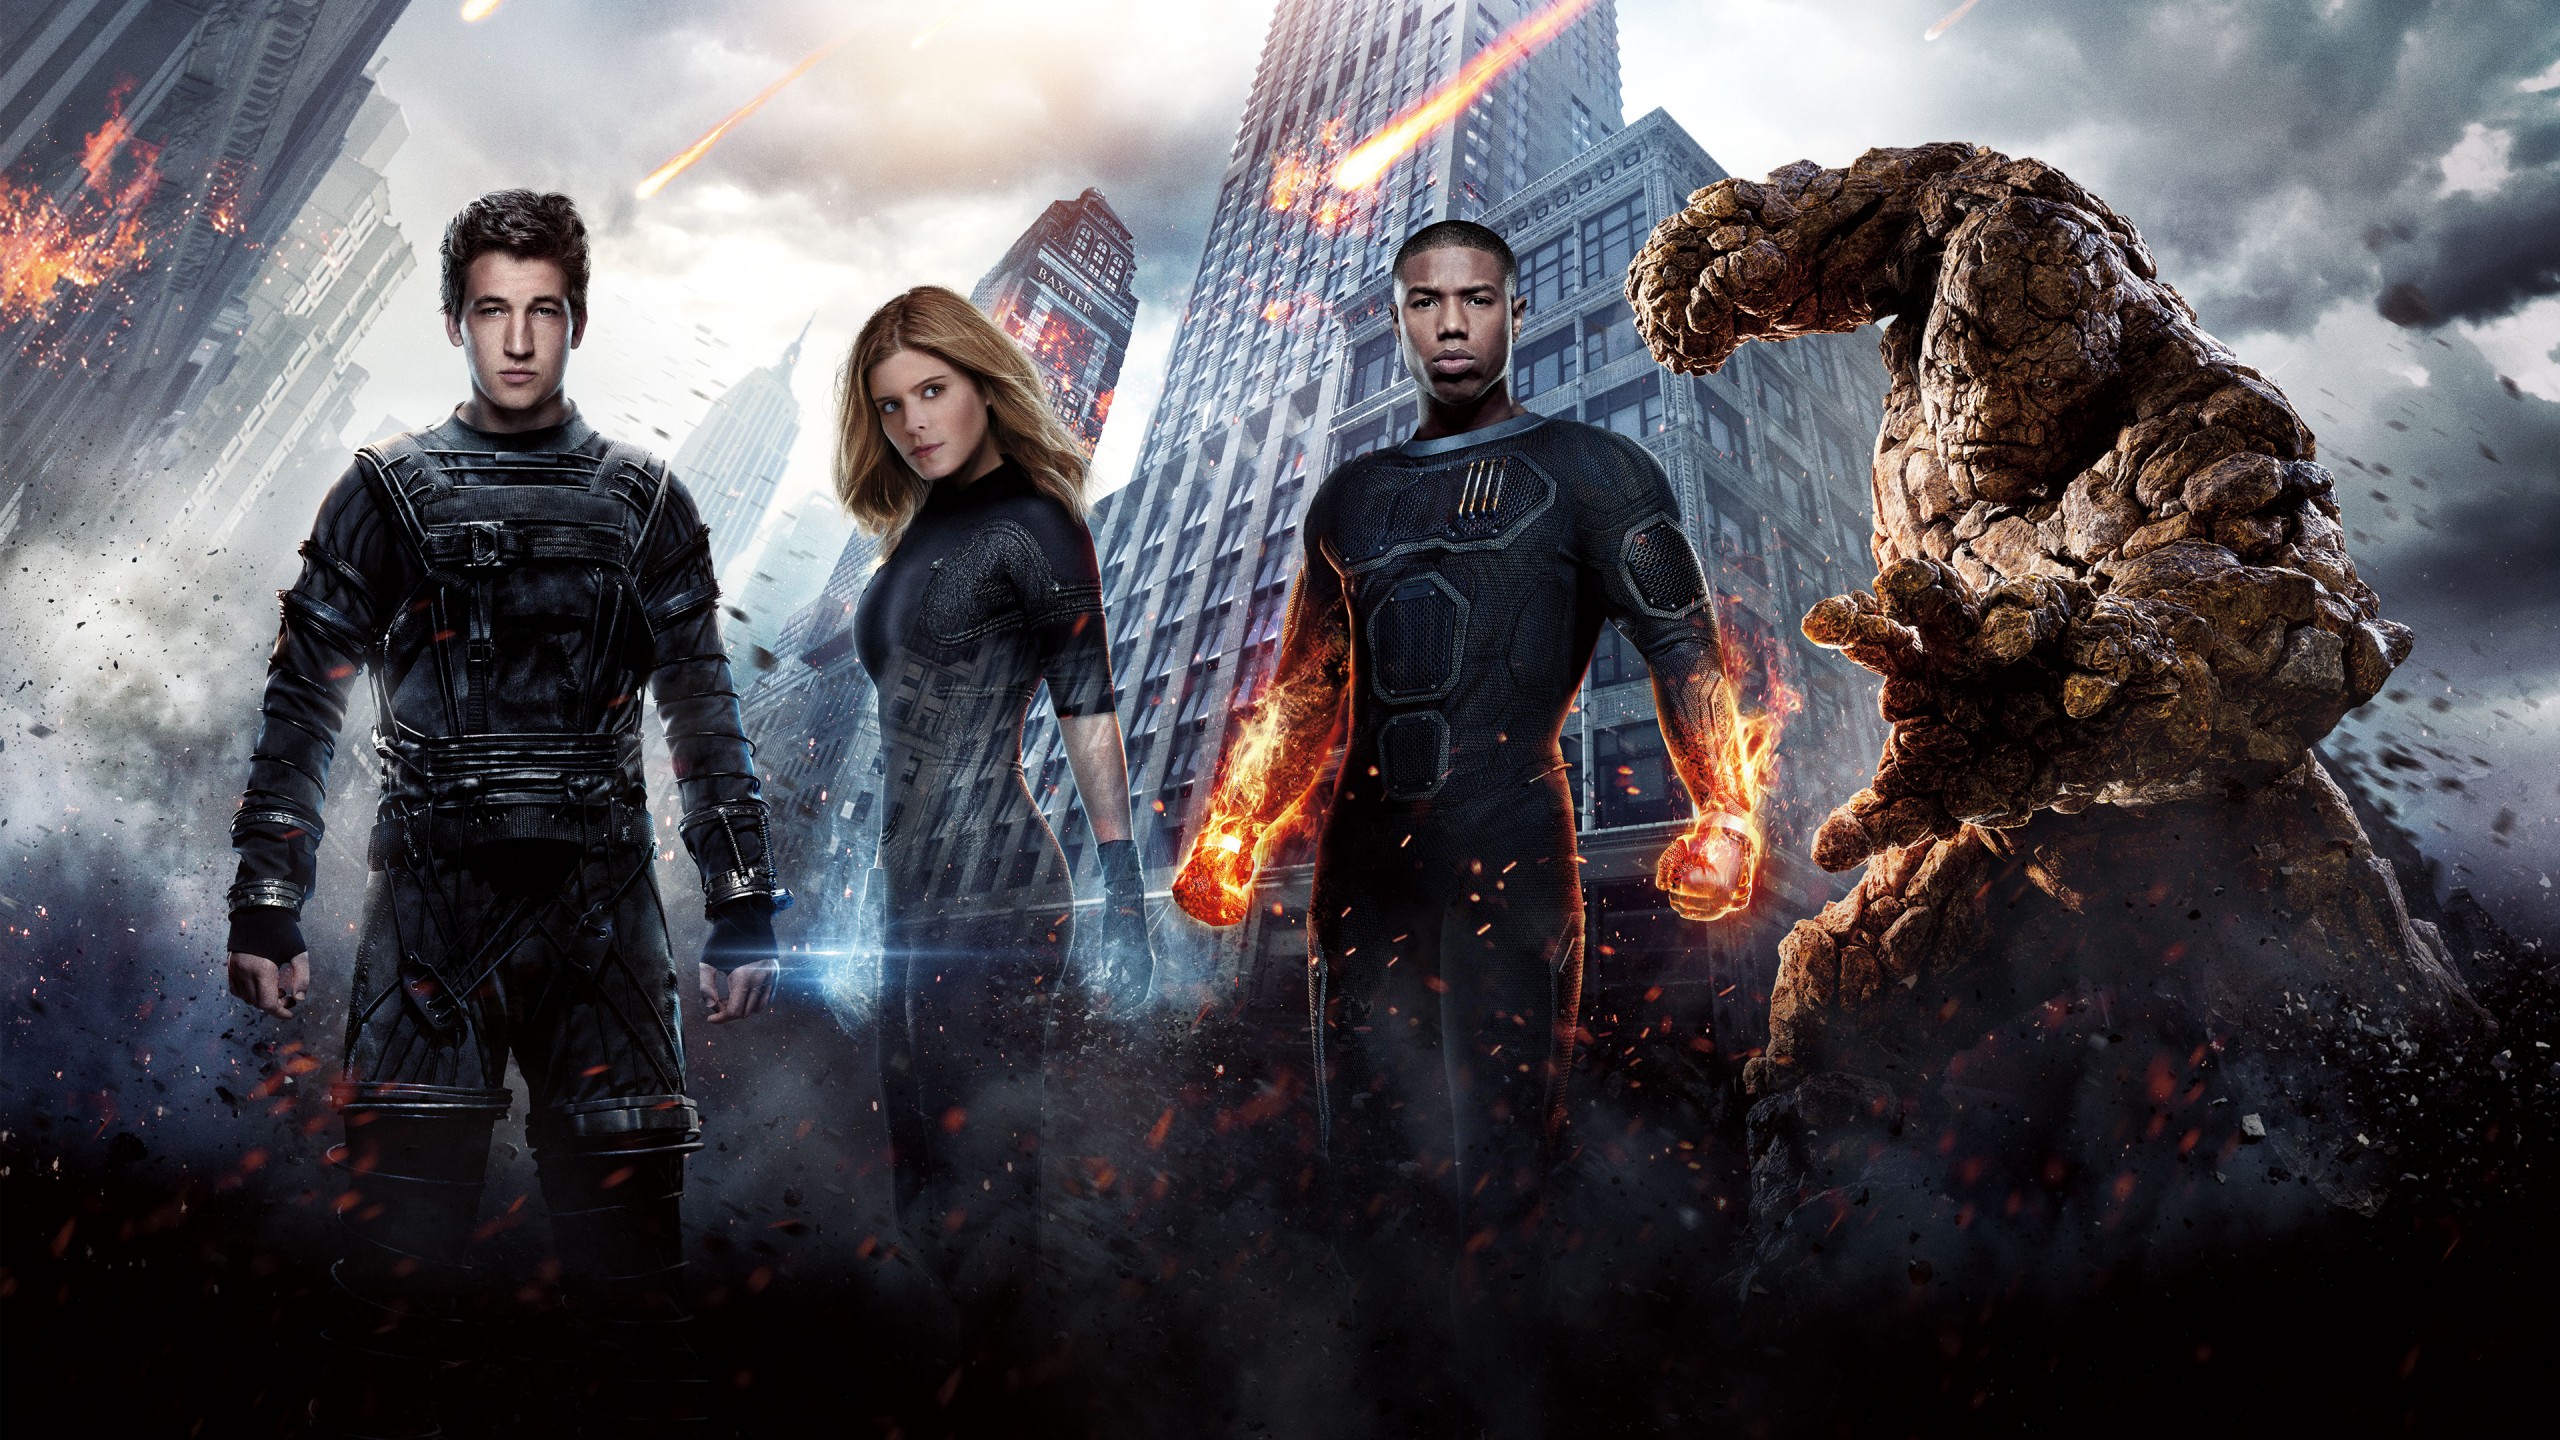 fantastic wallpapers hd,fantastic four,action adventure game,movie,fictional character,digital compositing